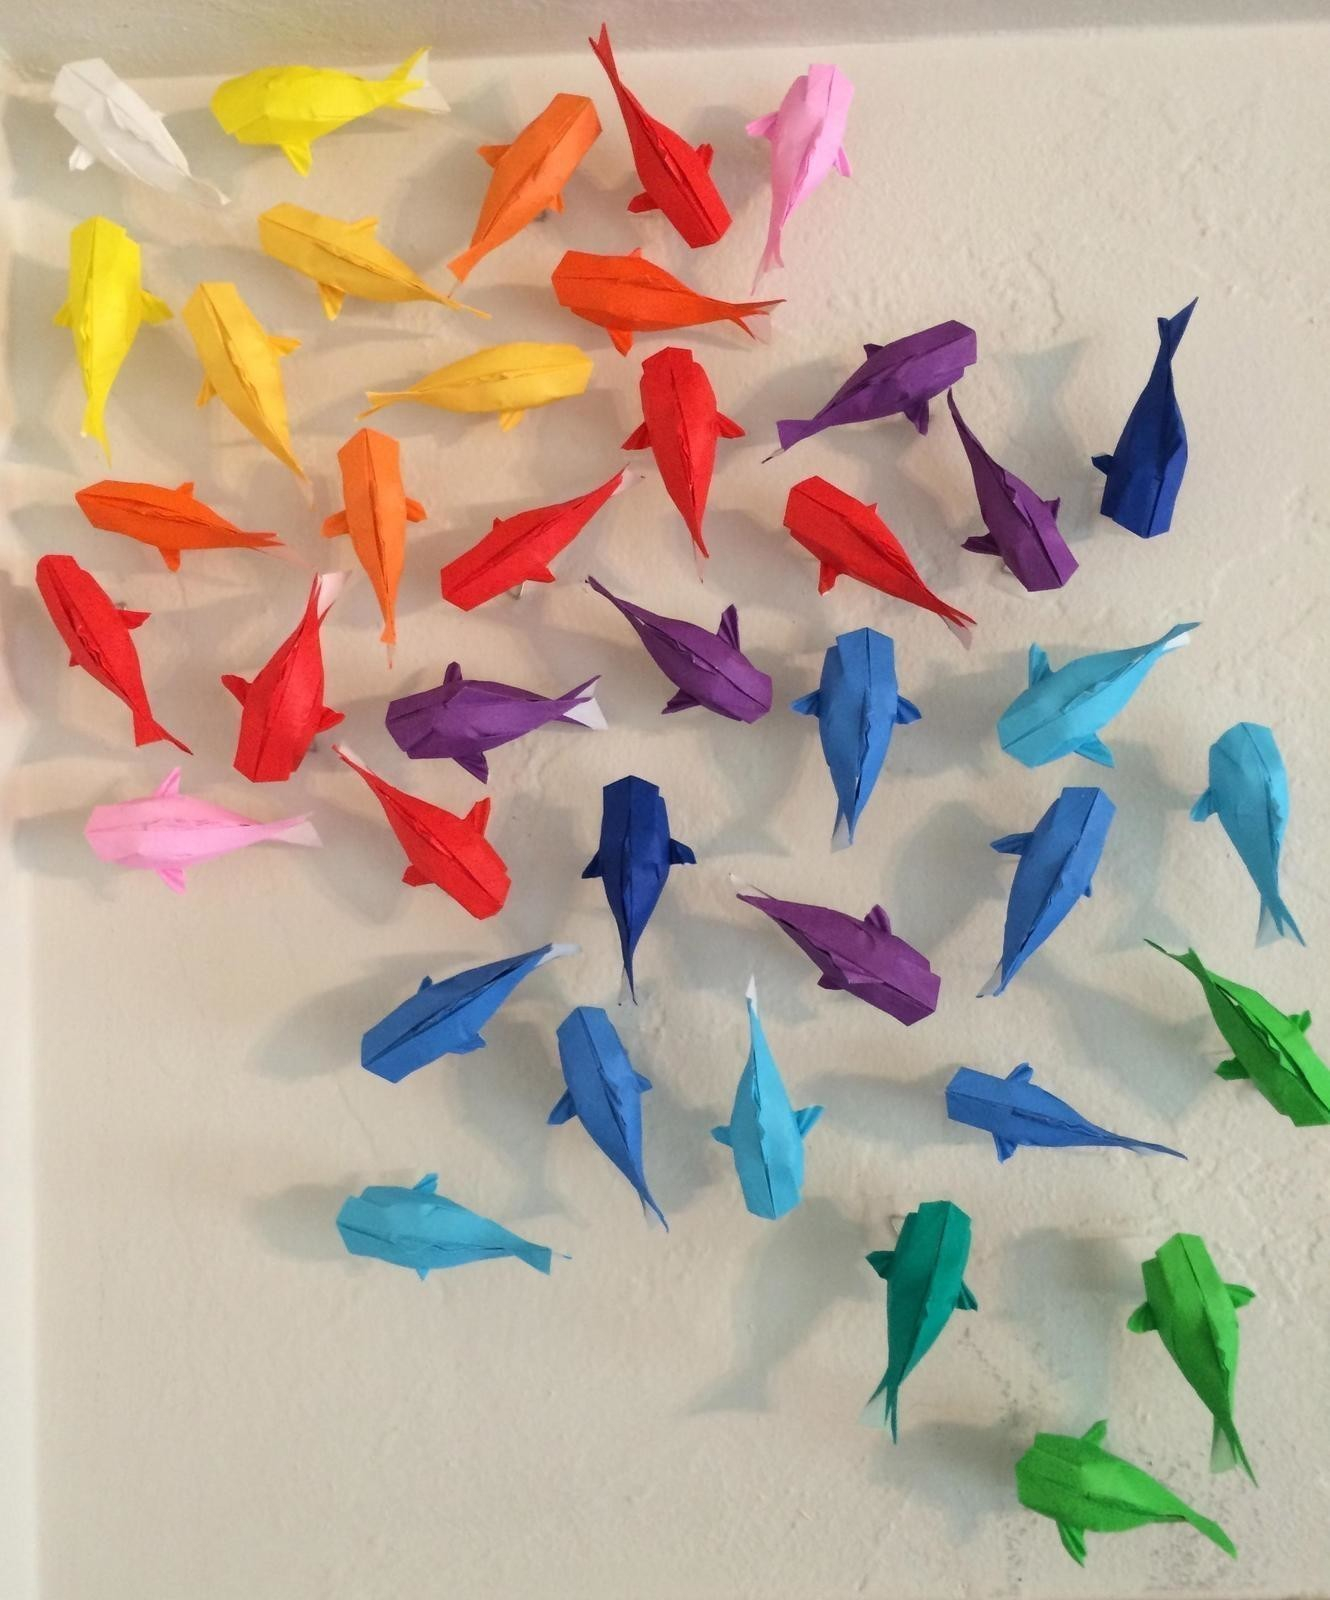 Origami Fish Video Wall Of Rainbow Koi How To Fold An Origami Fish Papercraft On